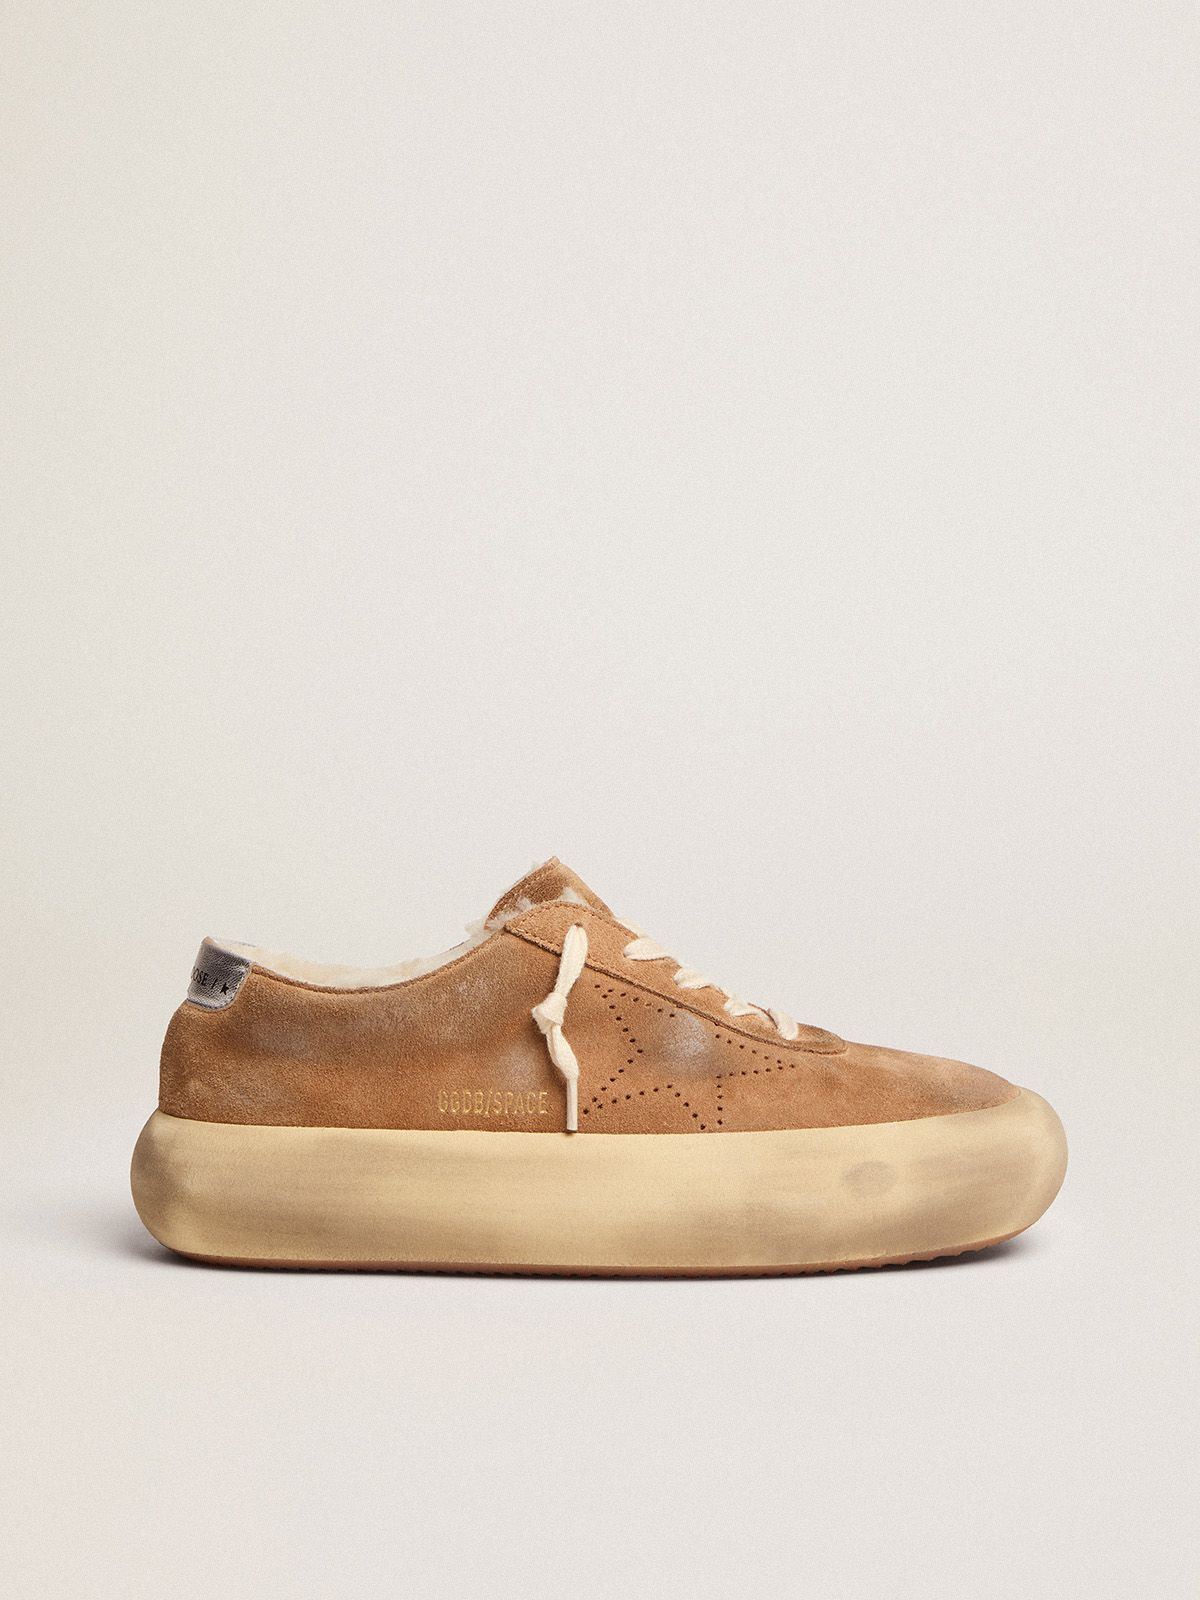 golden goose shoes with shearling suede tobacco-colored Space-Star lining in